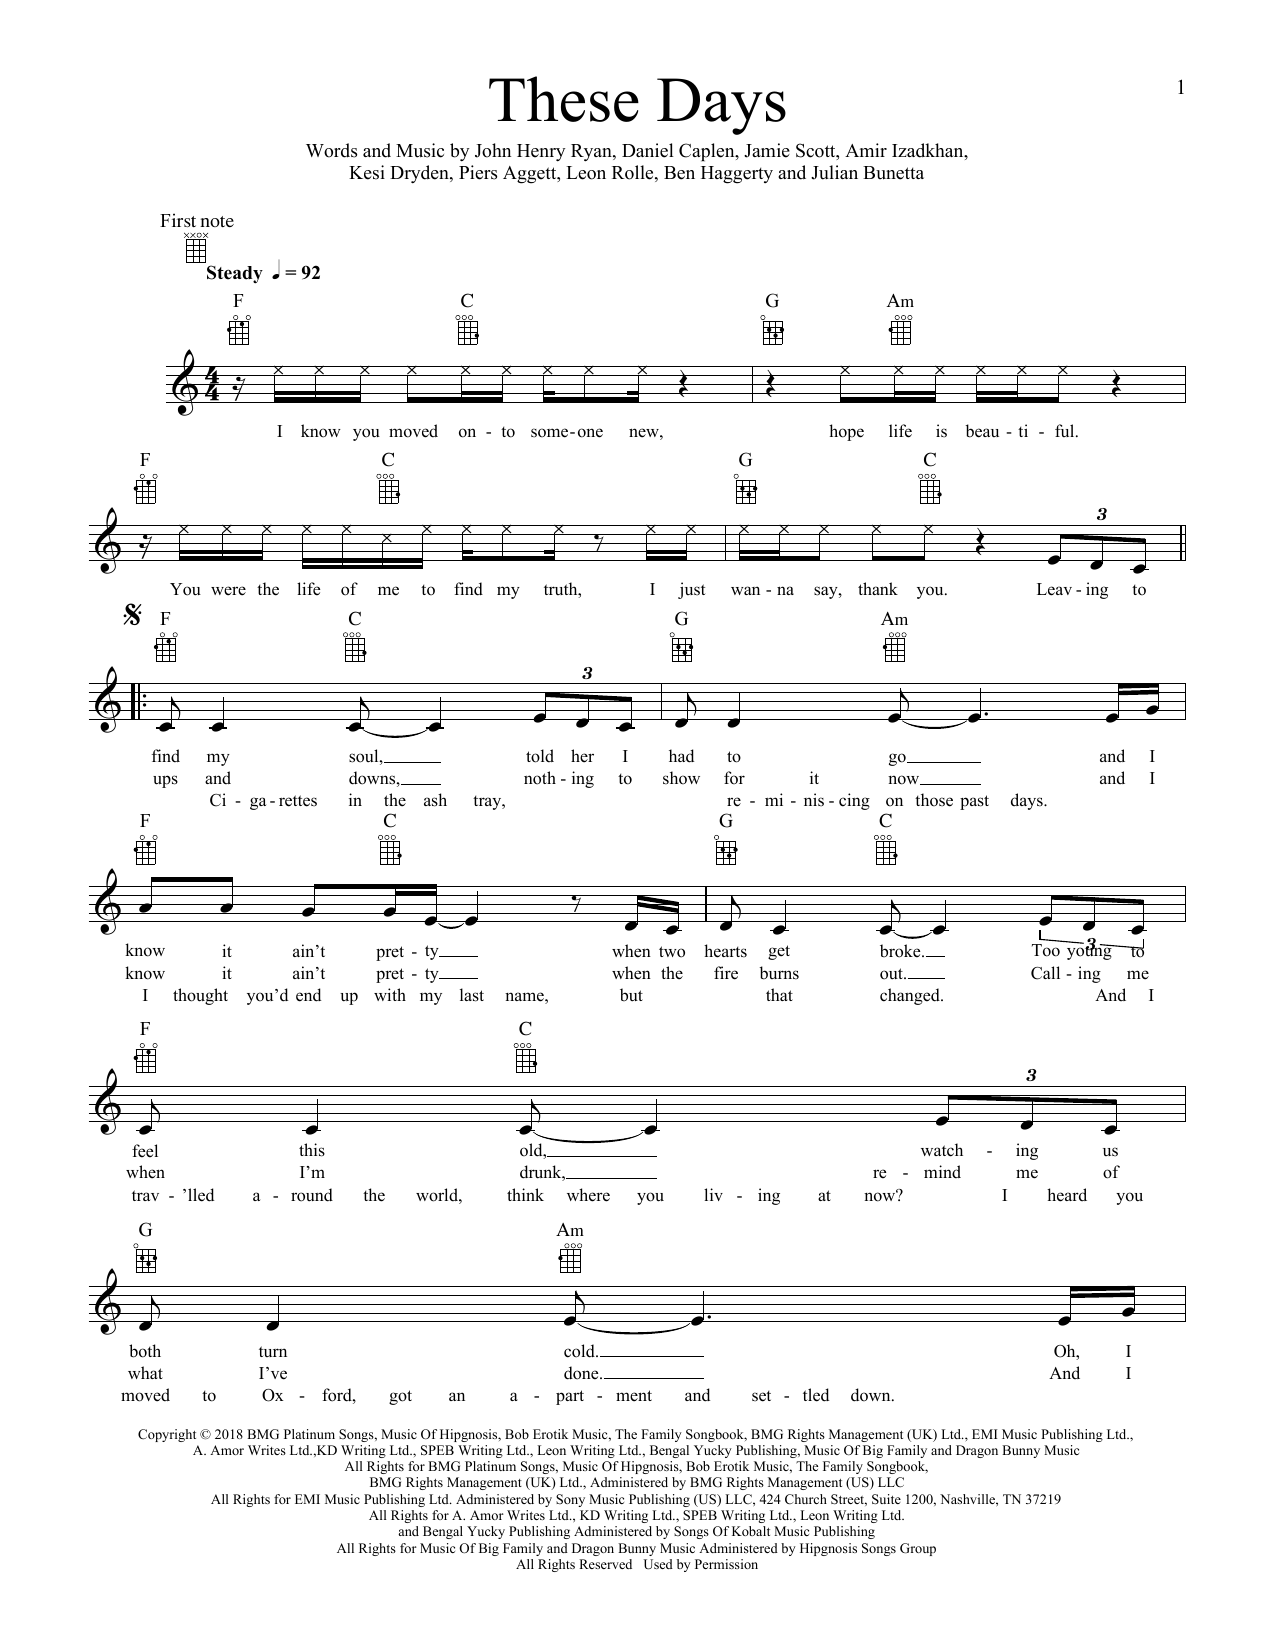 Rudimental These Days (featuring Jess Glynne, Macklemore and Dan Caplen) sheet music notes printable PDF score